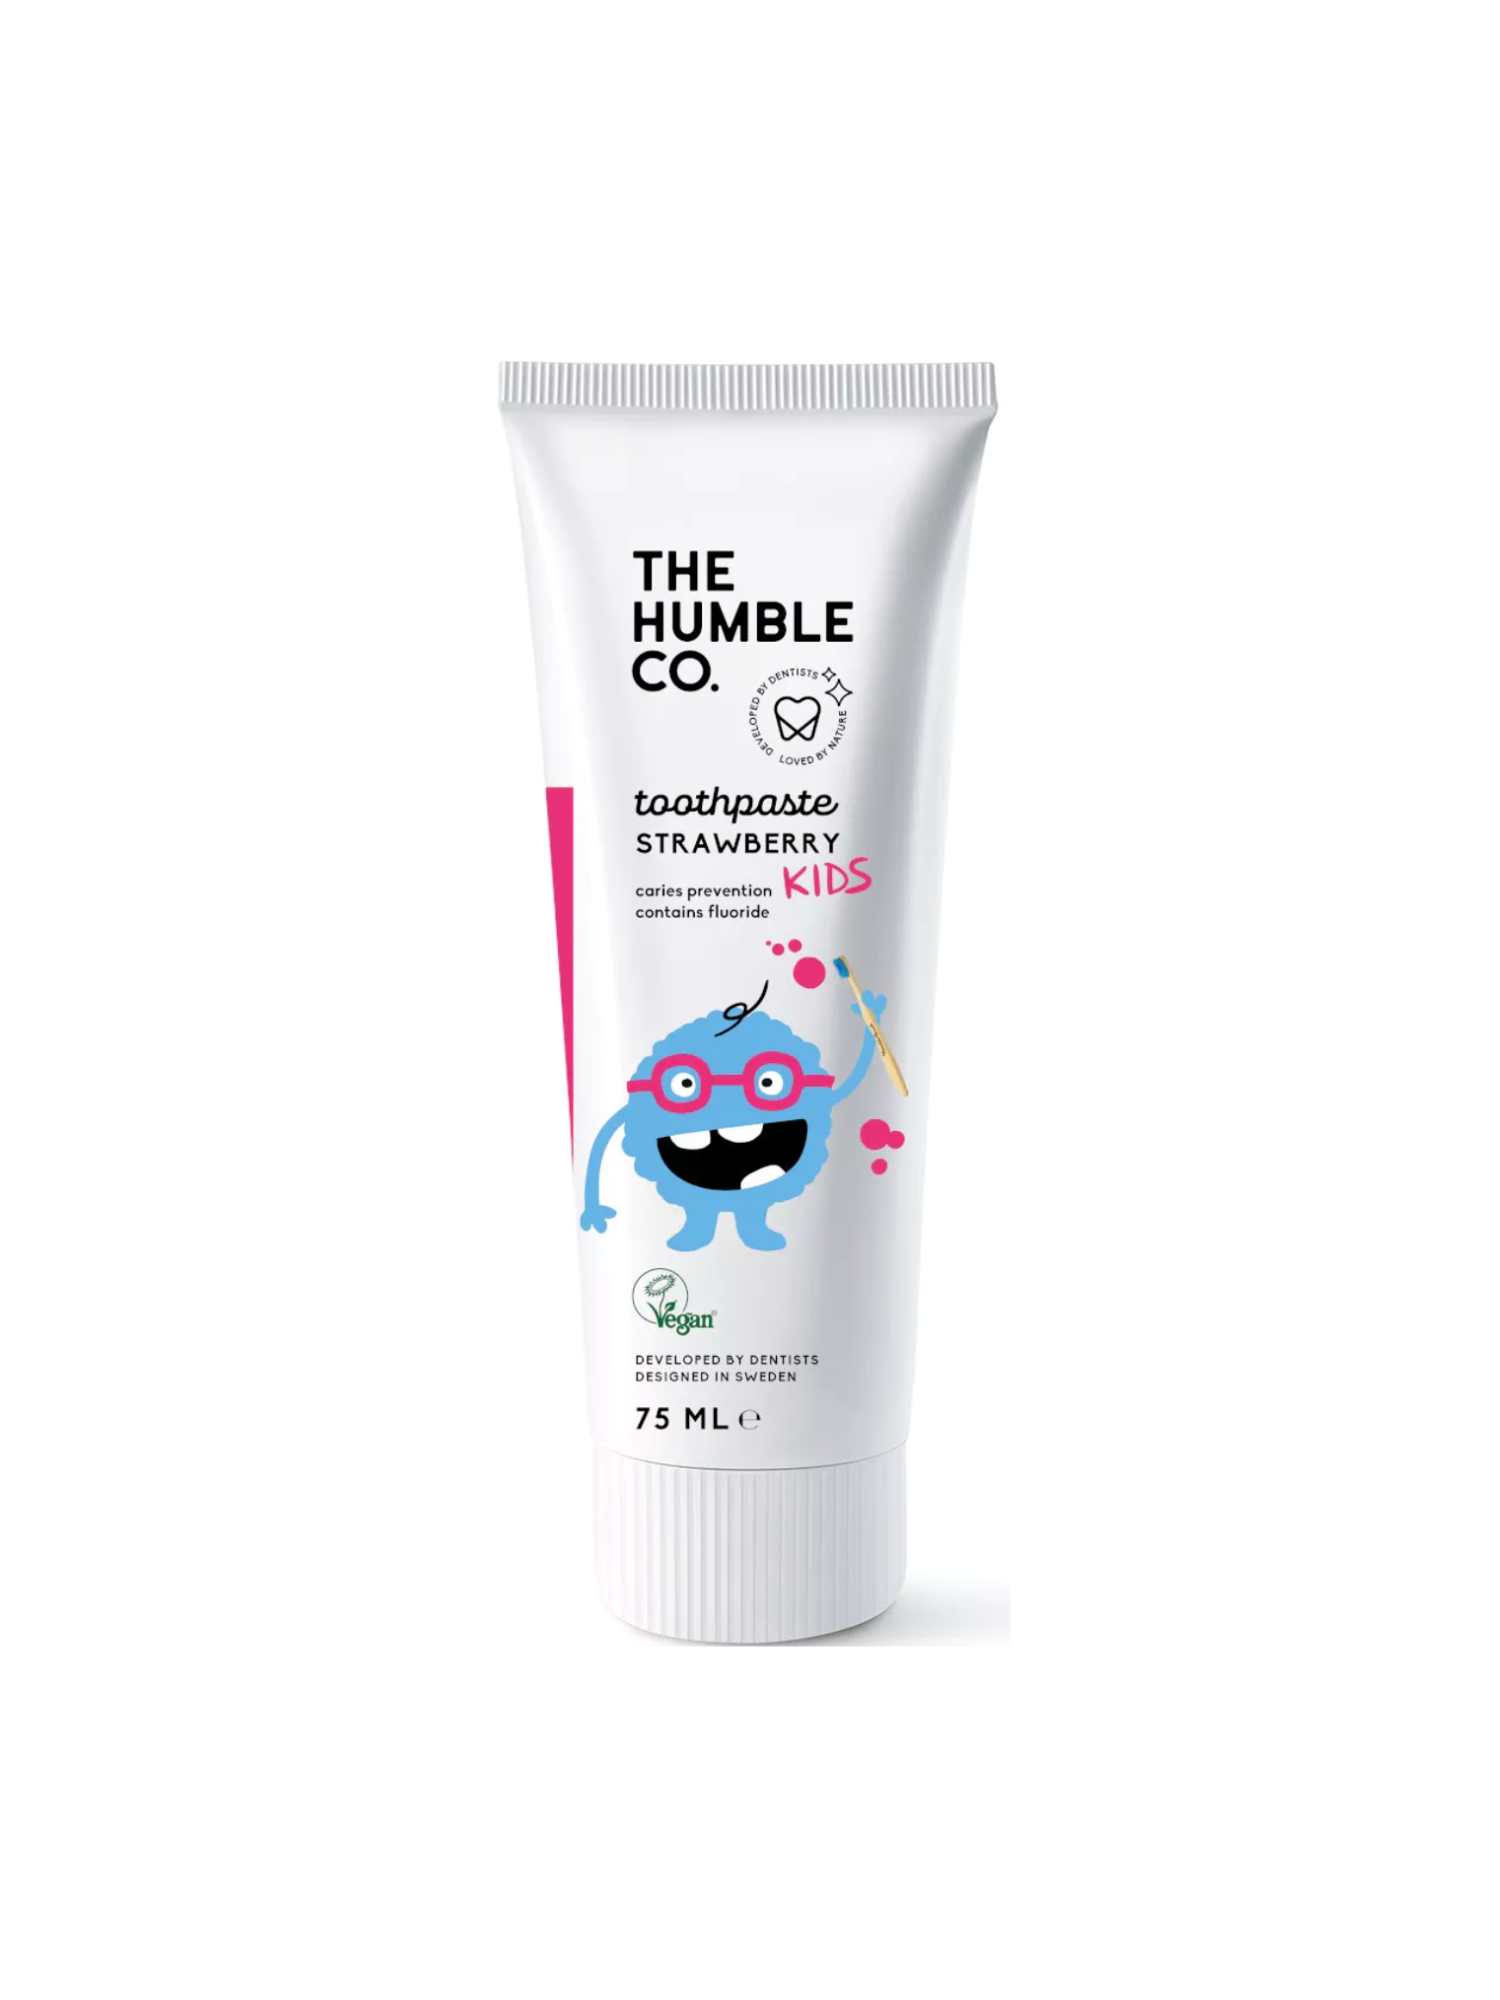 Natural Toothpaste Strawberry-Kids | Natural Toothpaste | Cinnamon with fluoride | The Humble Co. | Nourished Eco Oral Care | Natural Toothpaste| Kids Toothpaste| Tandpasta voor kinderen | tandpasta aarbei | fluoride tandpasta | The Humble Co. | Nourished